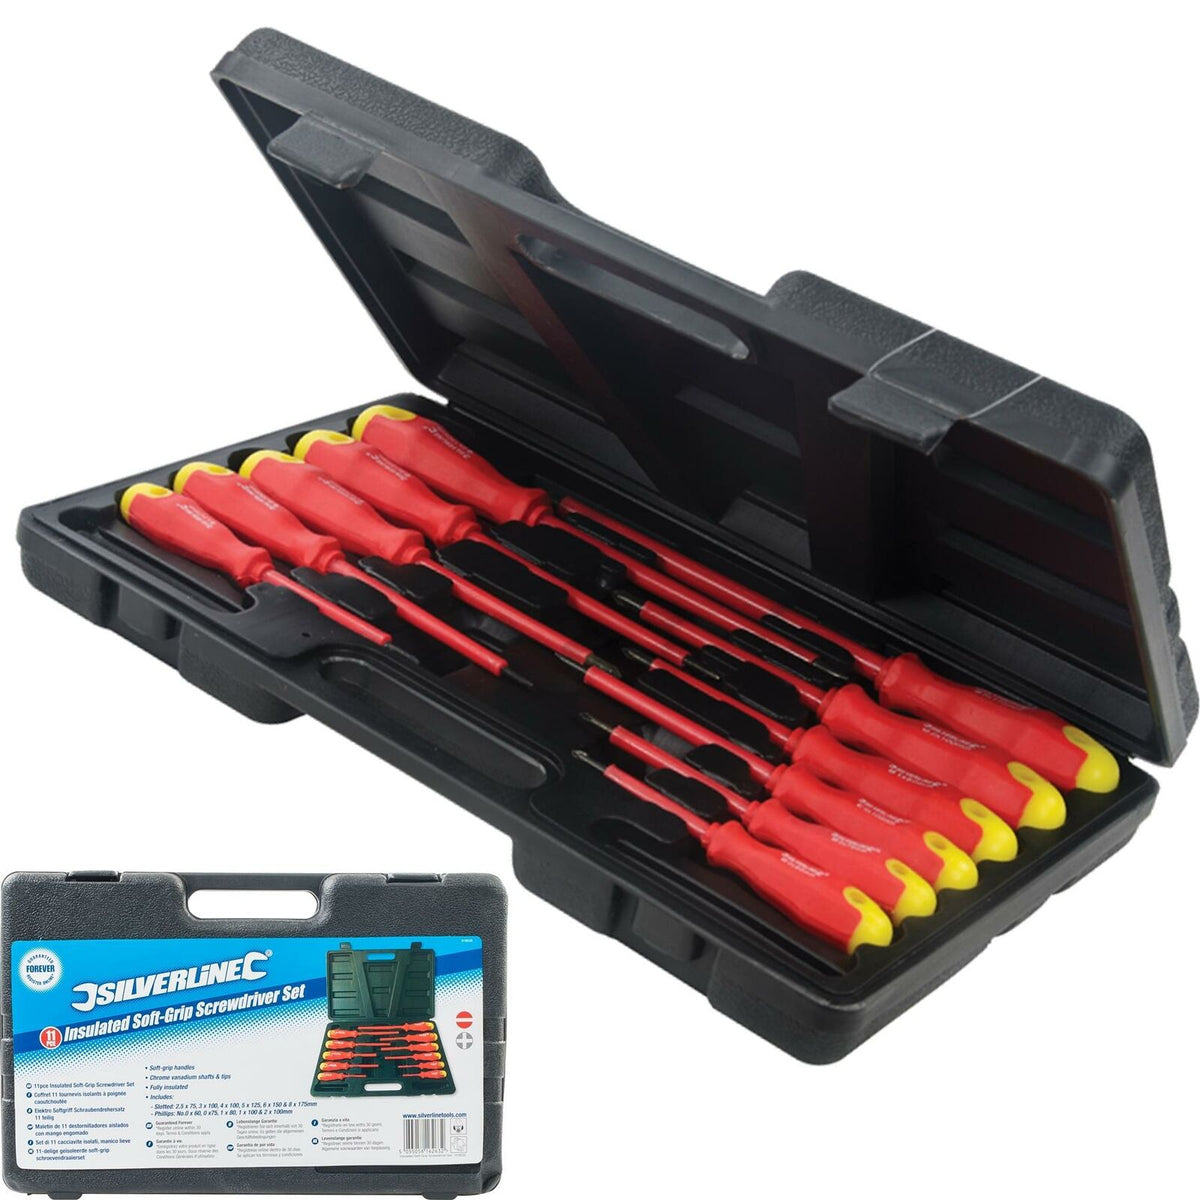 Silverline 11pc Insulated Magnetic Soft Grip Screwdriver Phillips Flat Set